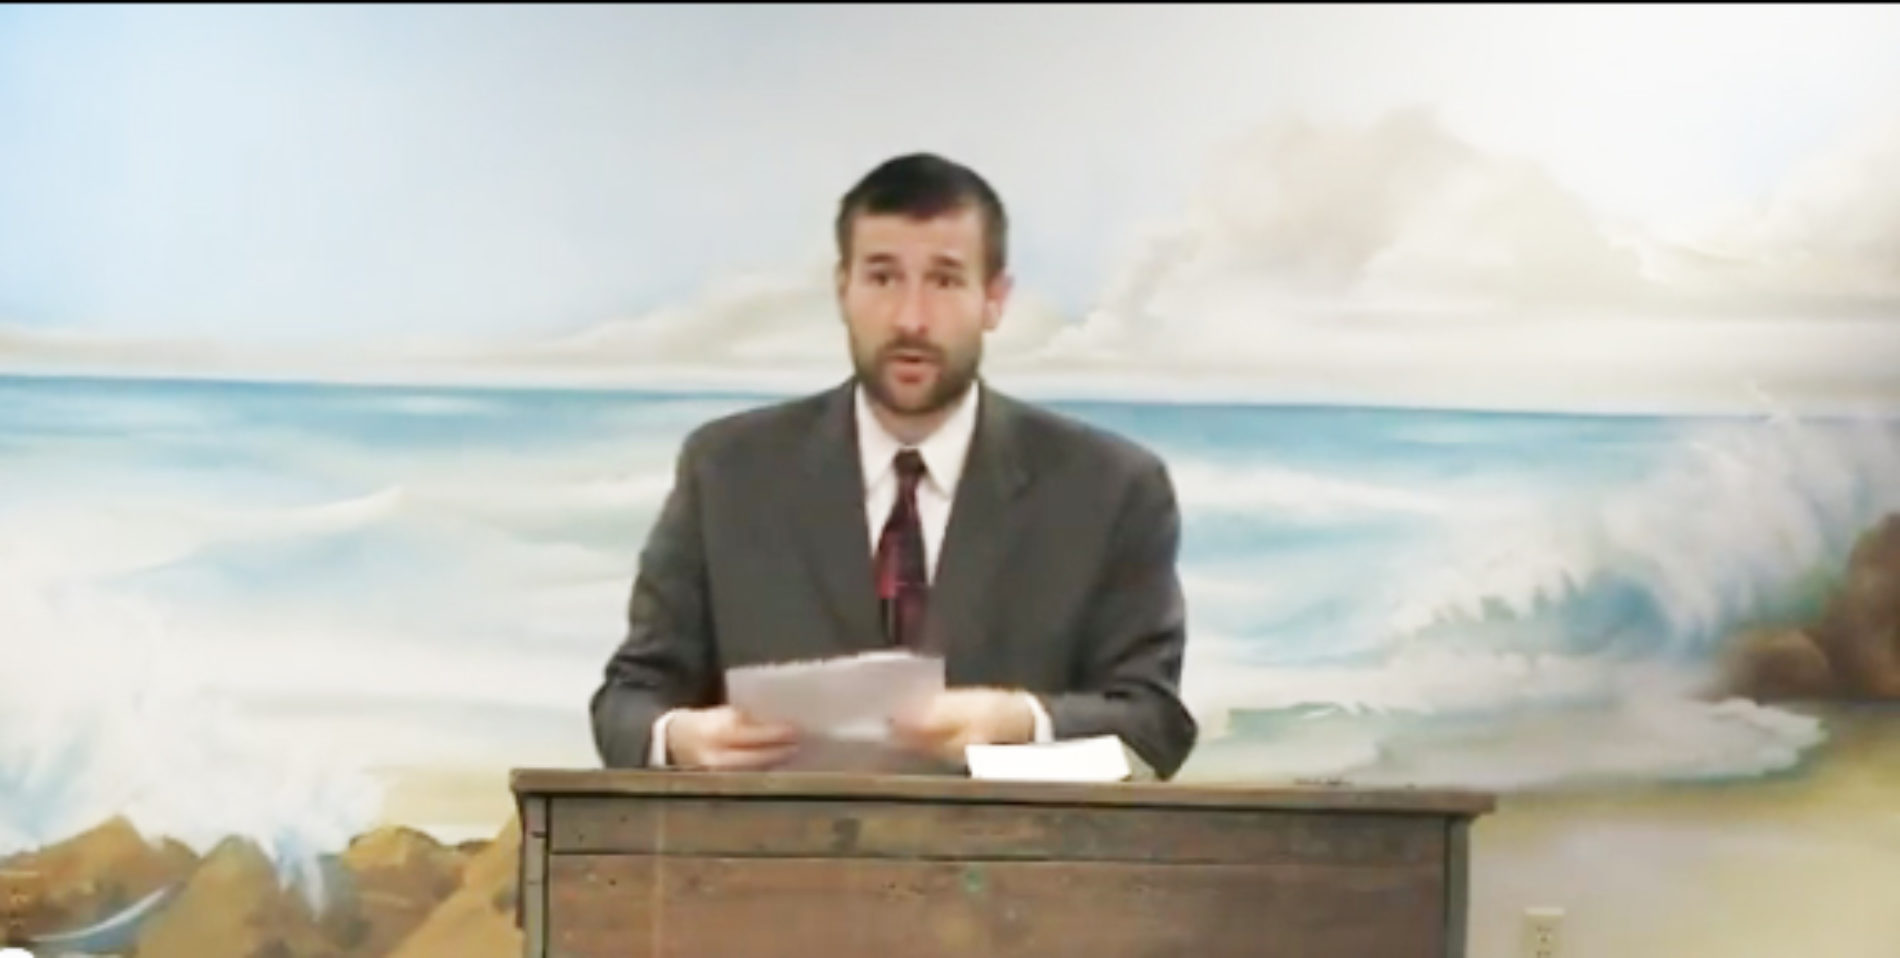 Pastor’s ‘Biblical’ Solution To Homosexuality Is Mass Killings